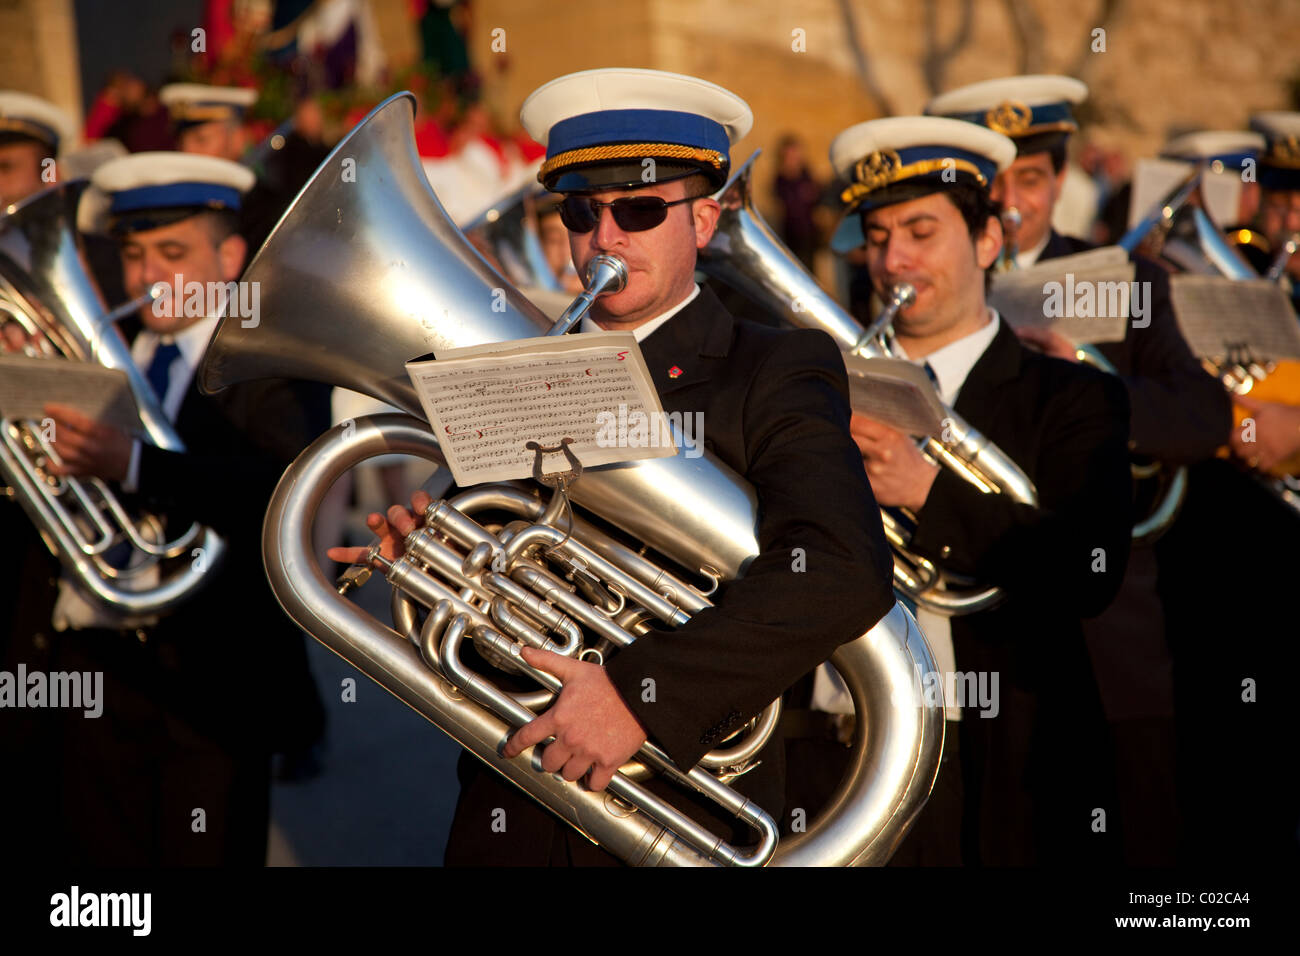 Members of a brass band in dark clothes play music during street parades commemorating Good Friday that are held in Malta. Stock Photo